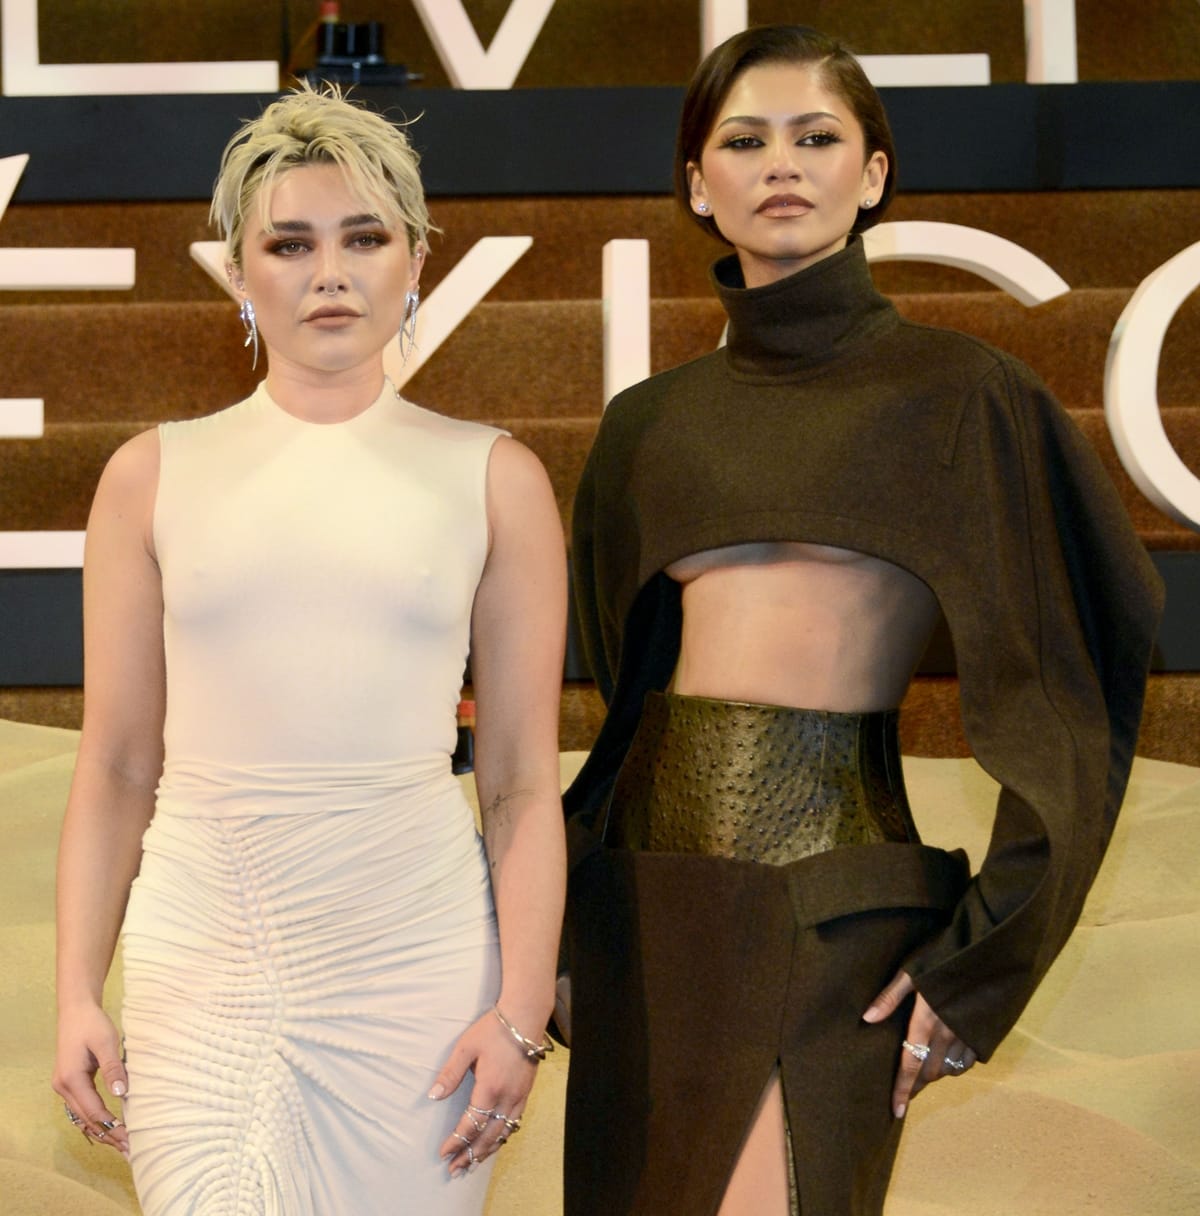 Zendaya's impeccable style shines through with Bulgari diamond jewelry, adding a touch of sophistication to her premiere look as she poses with Florence Pugh